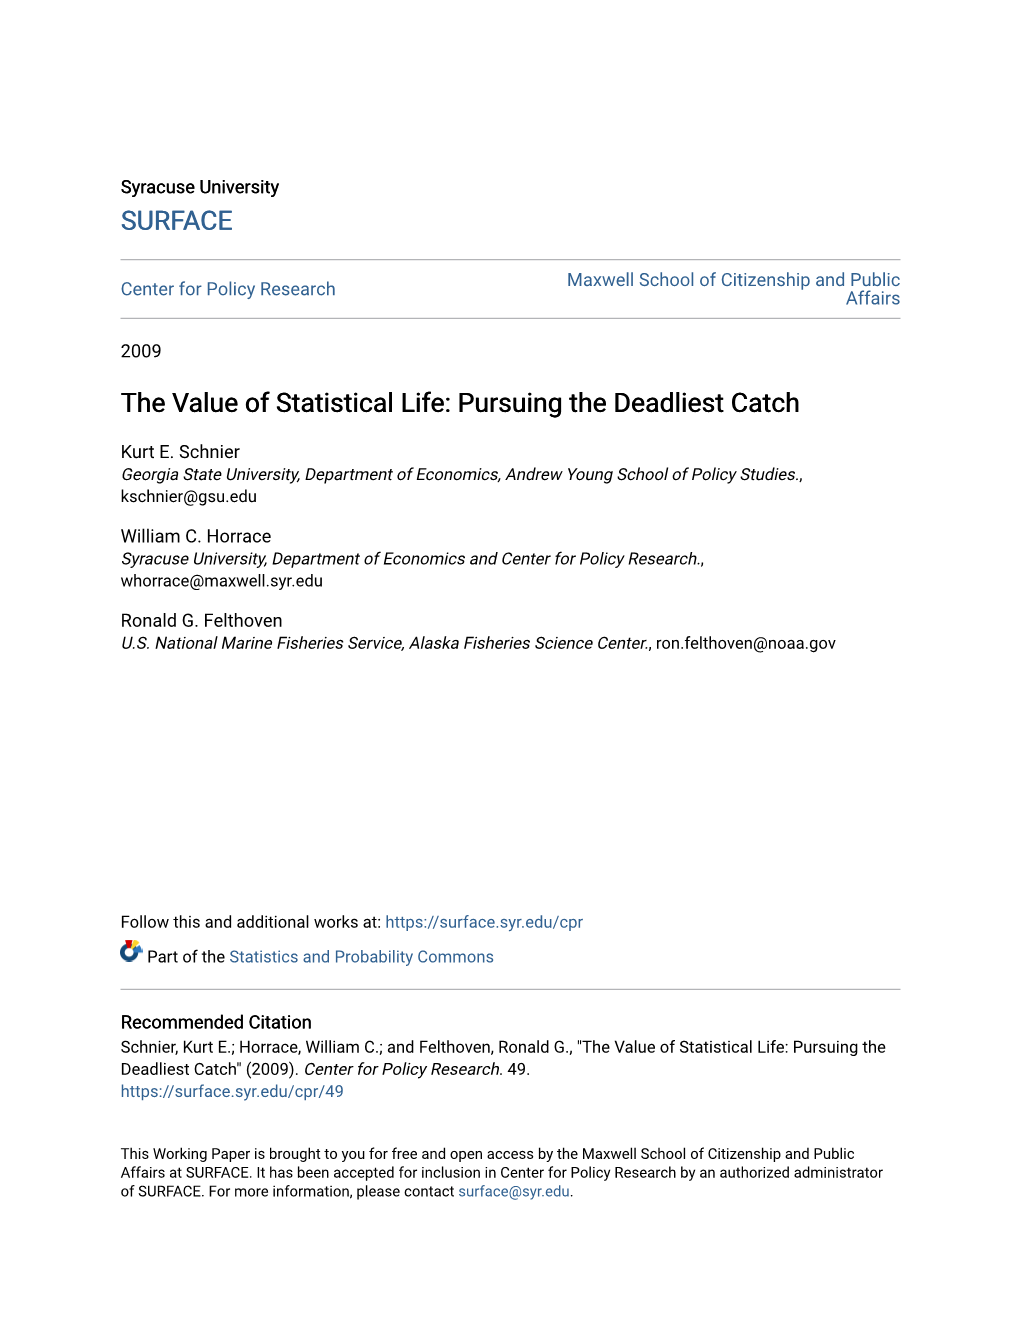 The Value of Statistical Life: Pursuing the Deadliest Catch